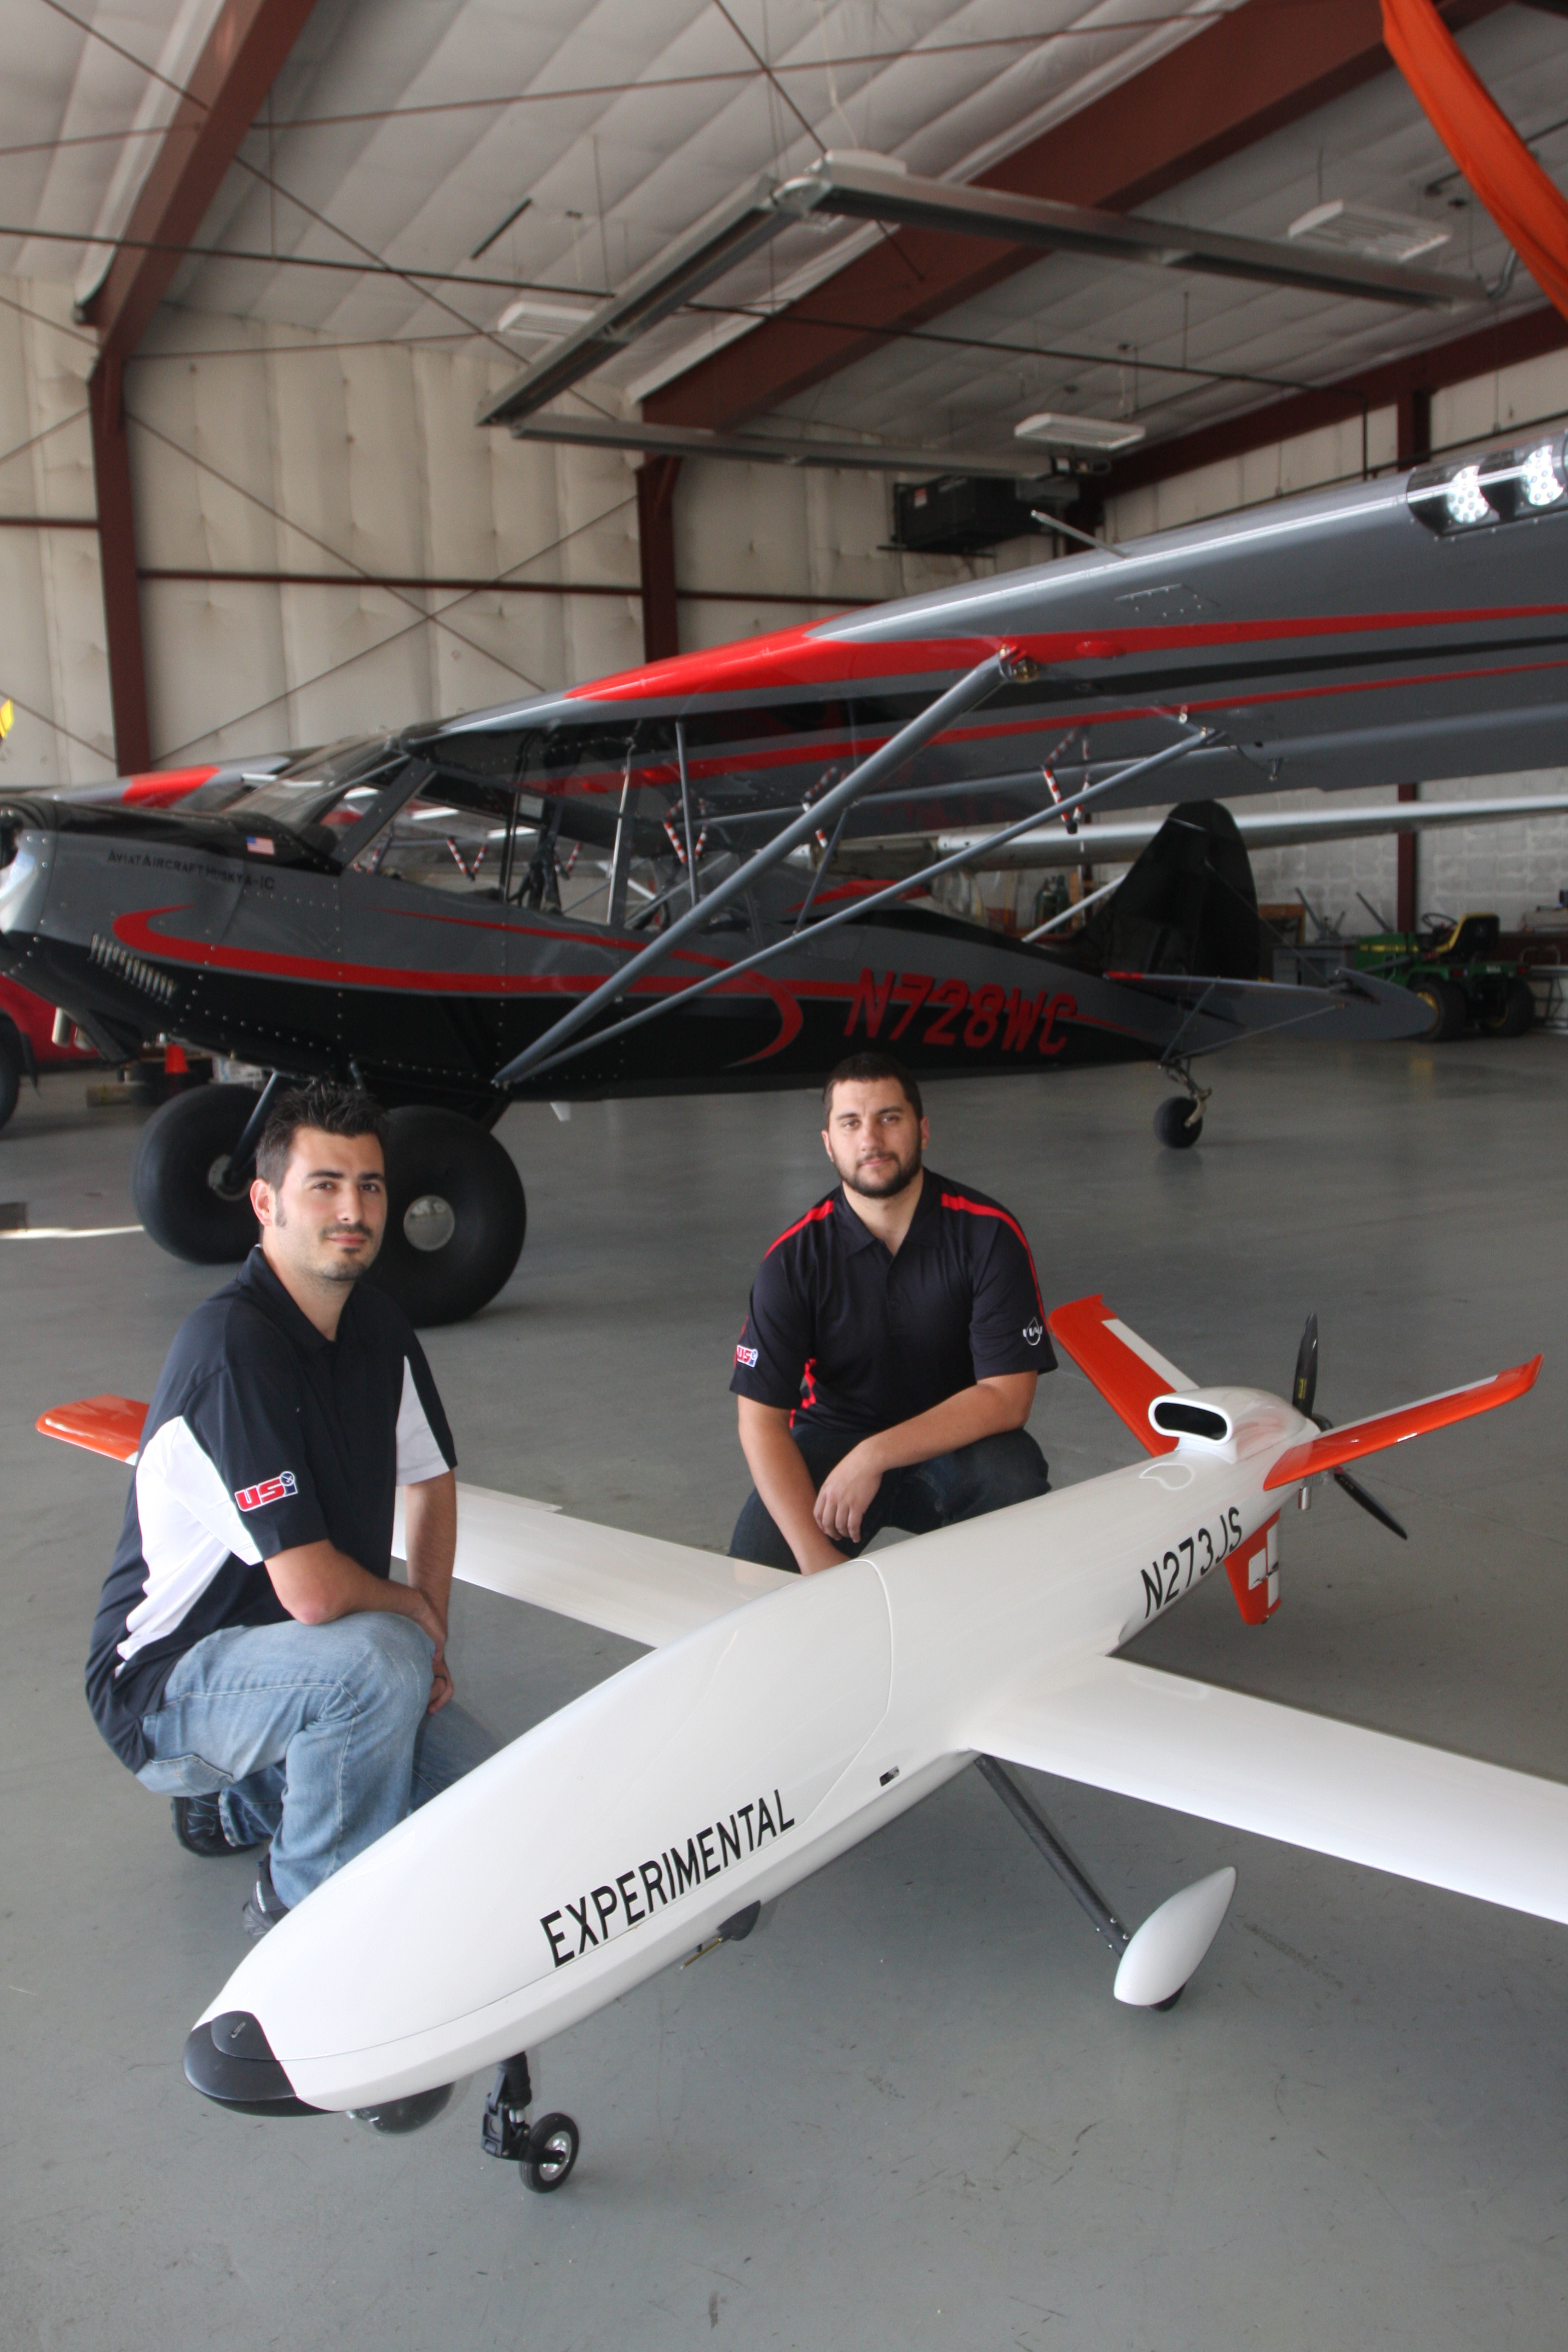 Alan Horzewski, left, and Cameron Berg posed with the Sandstorm unmanned aerial system, based at the Langlade County Airport. The two men are employed by Unmanned Systems, Inc., a ceter for research, development and training on the cutting-edge technology.